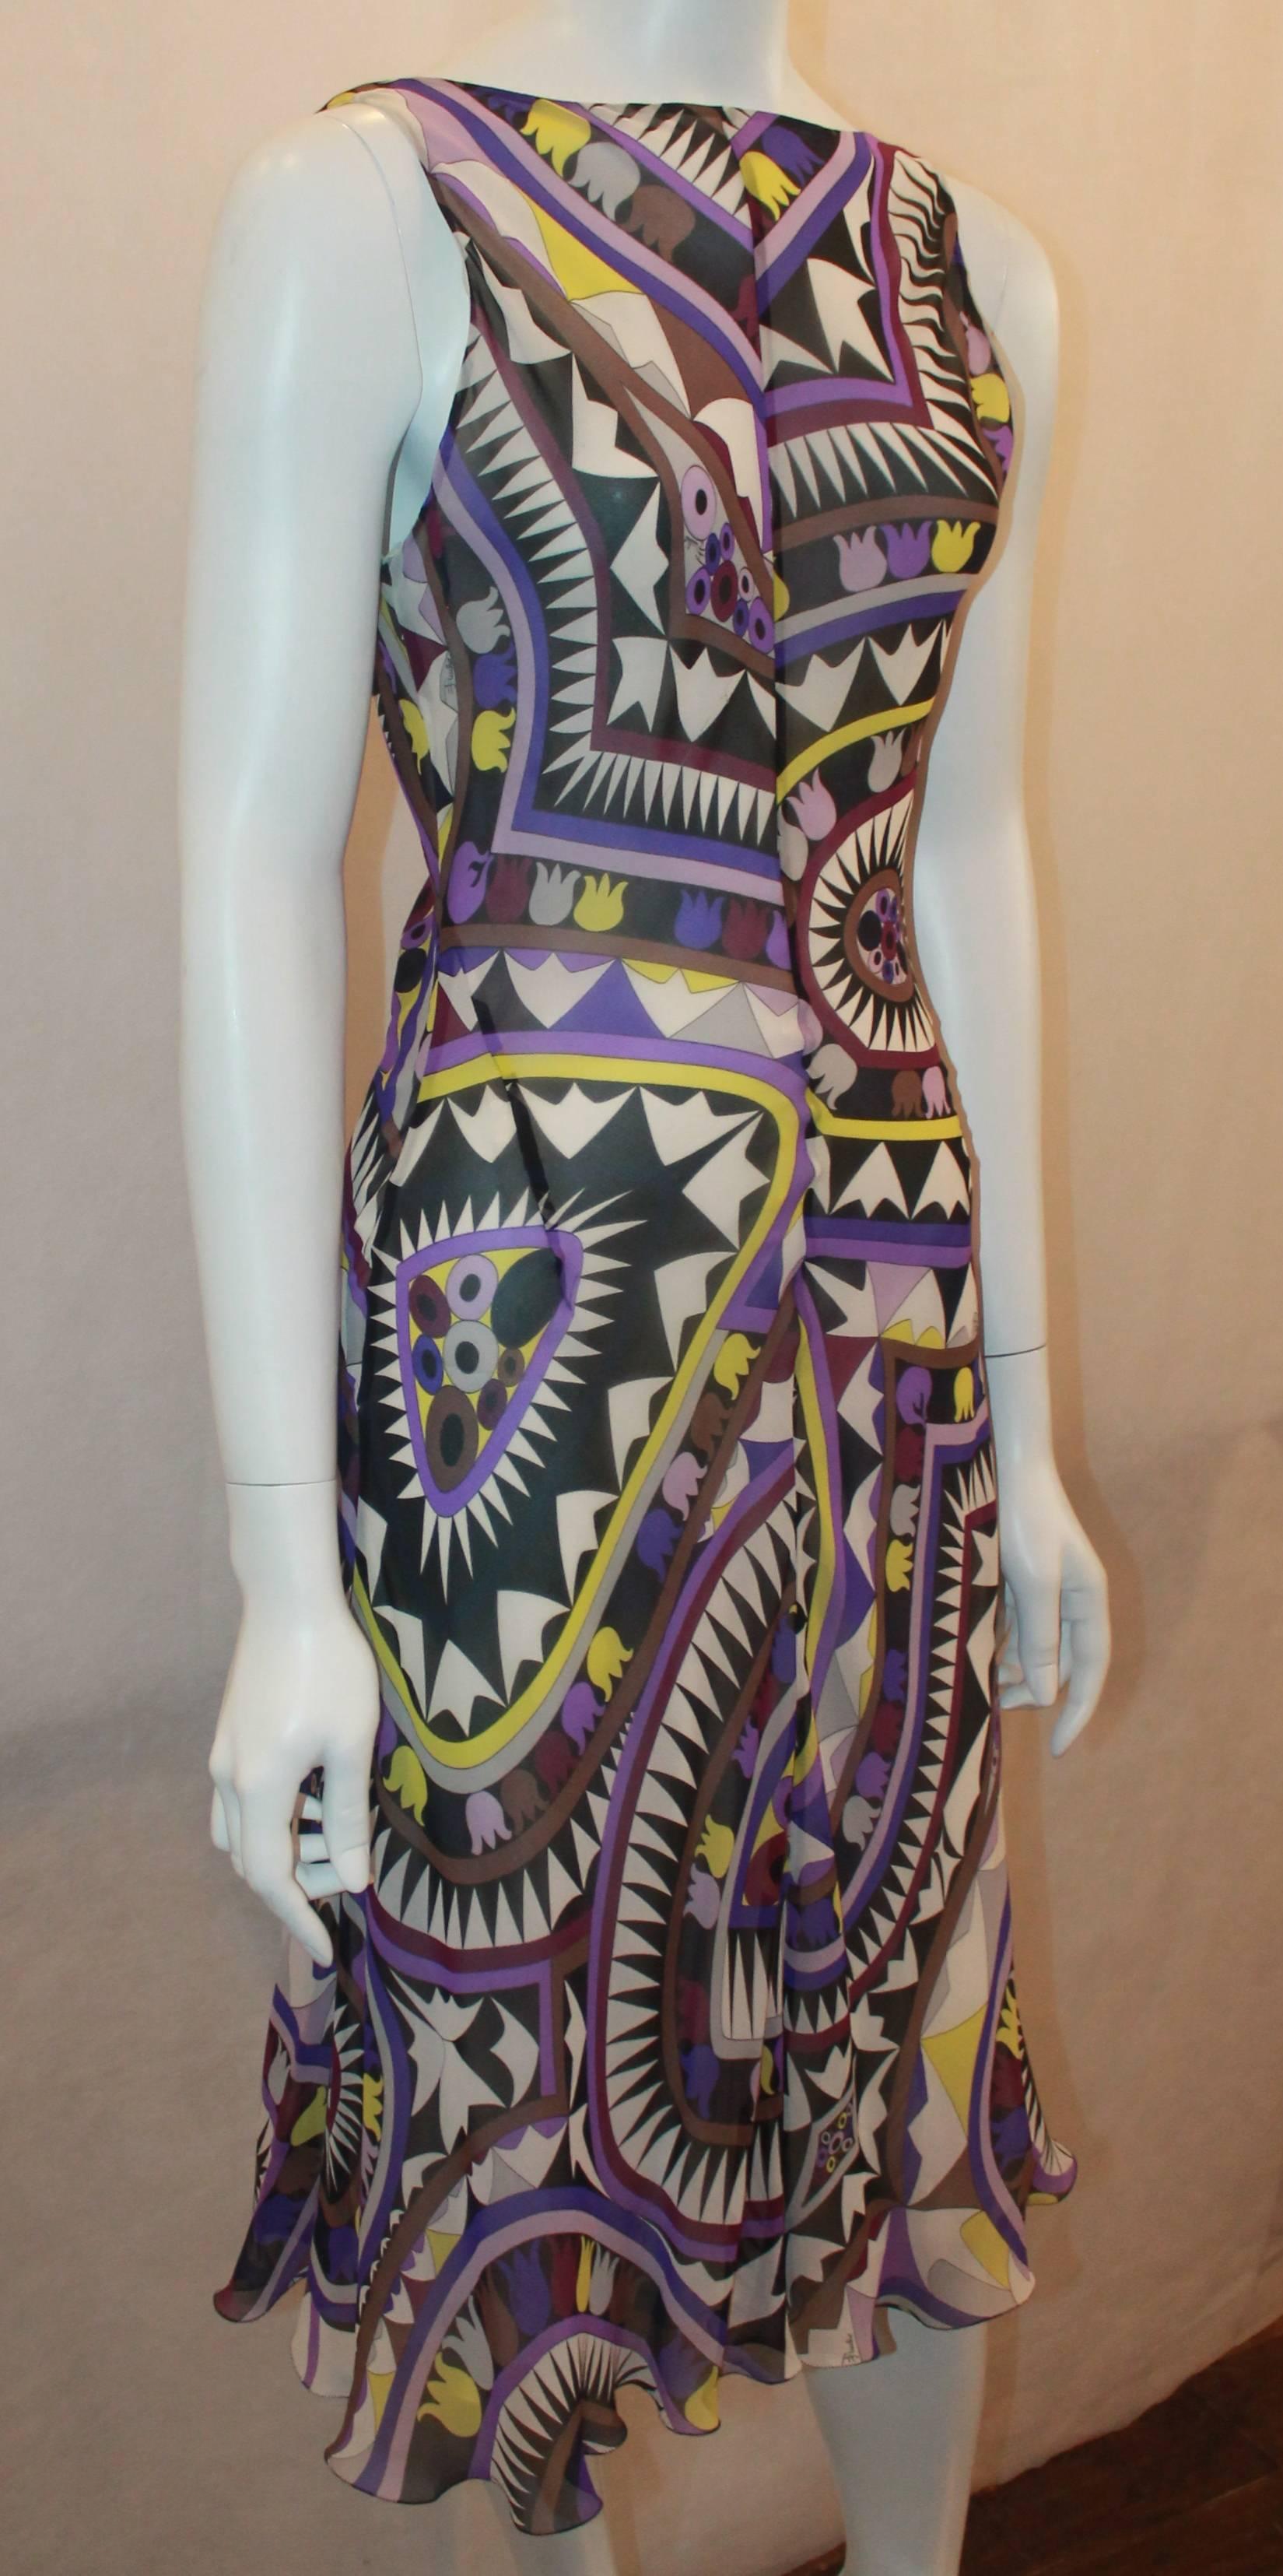 Emilio Pucci Purple & Lime Silk Chiffon Printed Sleeveless Dress - 8. This dress is in excellent condition and features a geometric print with purples, green, white, and black. It also has a low back with a tie.

Measurements:
Bust- 38